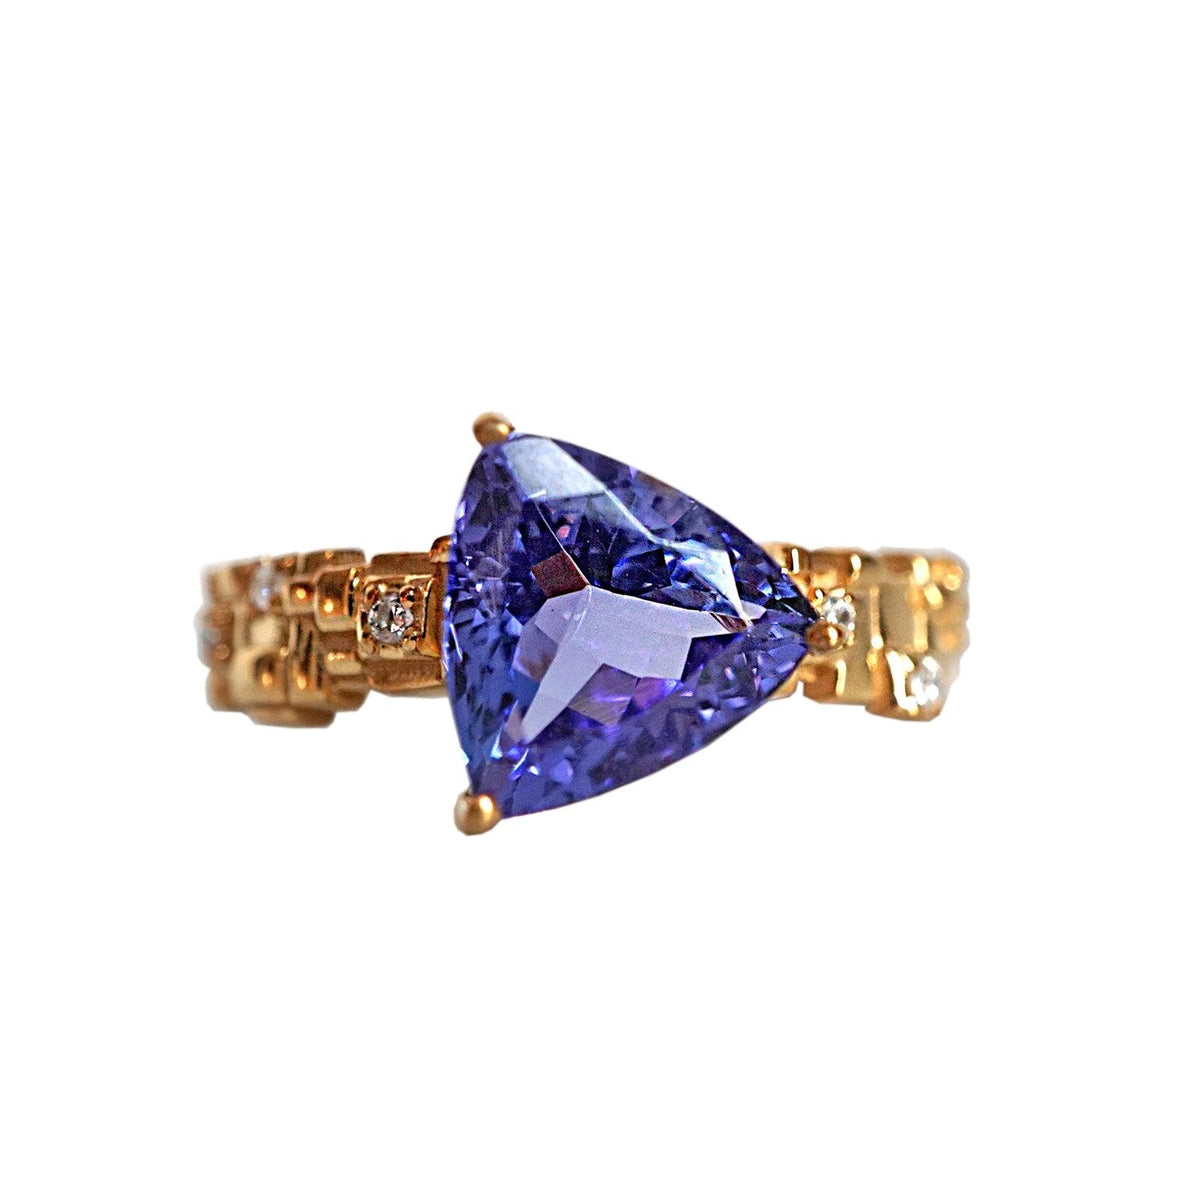 One Of A Kind: Tanzanite Trillion Fairy Steps Ring, 2.55ct - Tippy Taste Jewelry